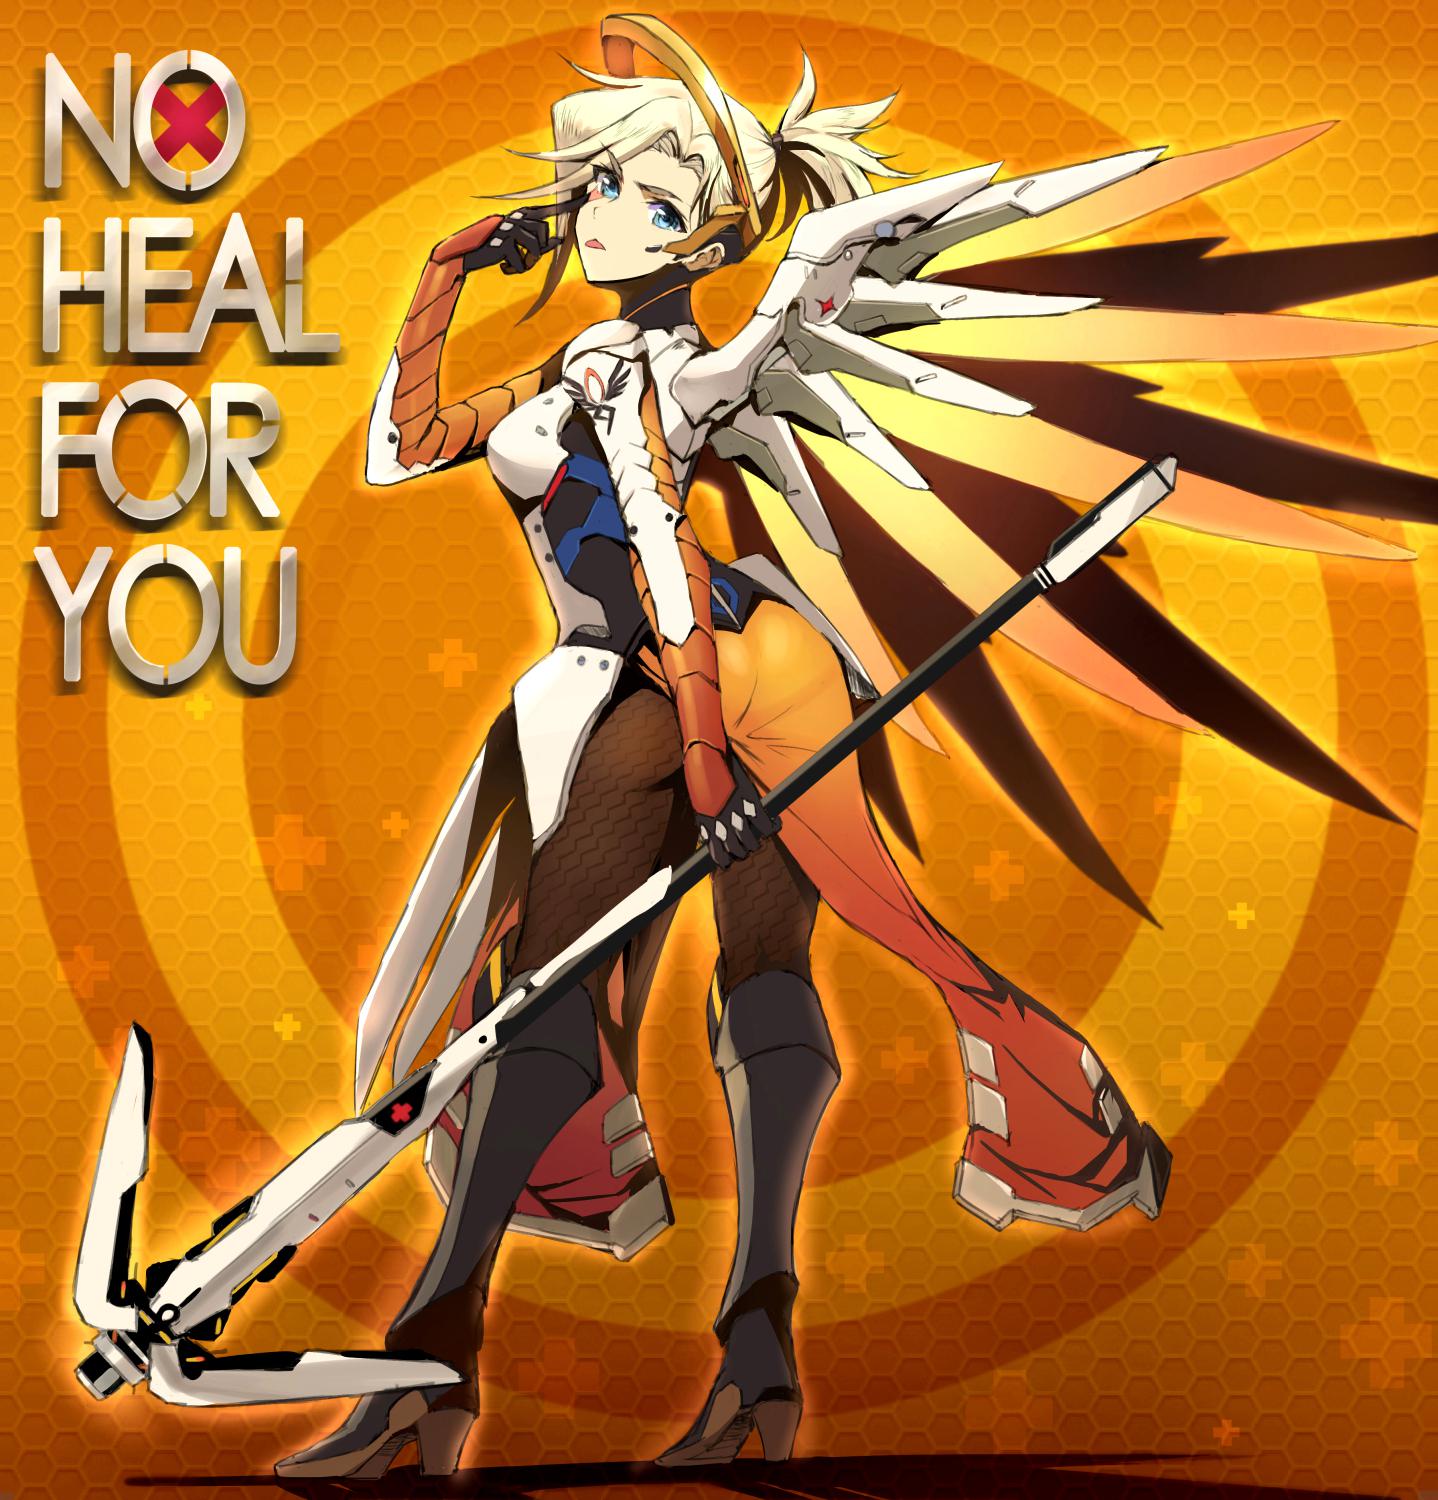 No heal for you !